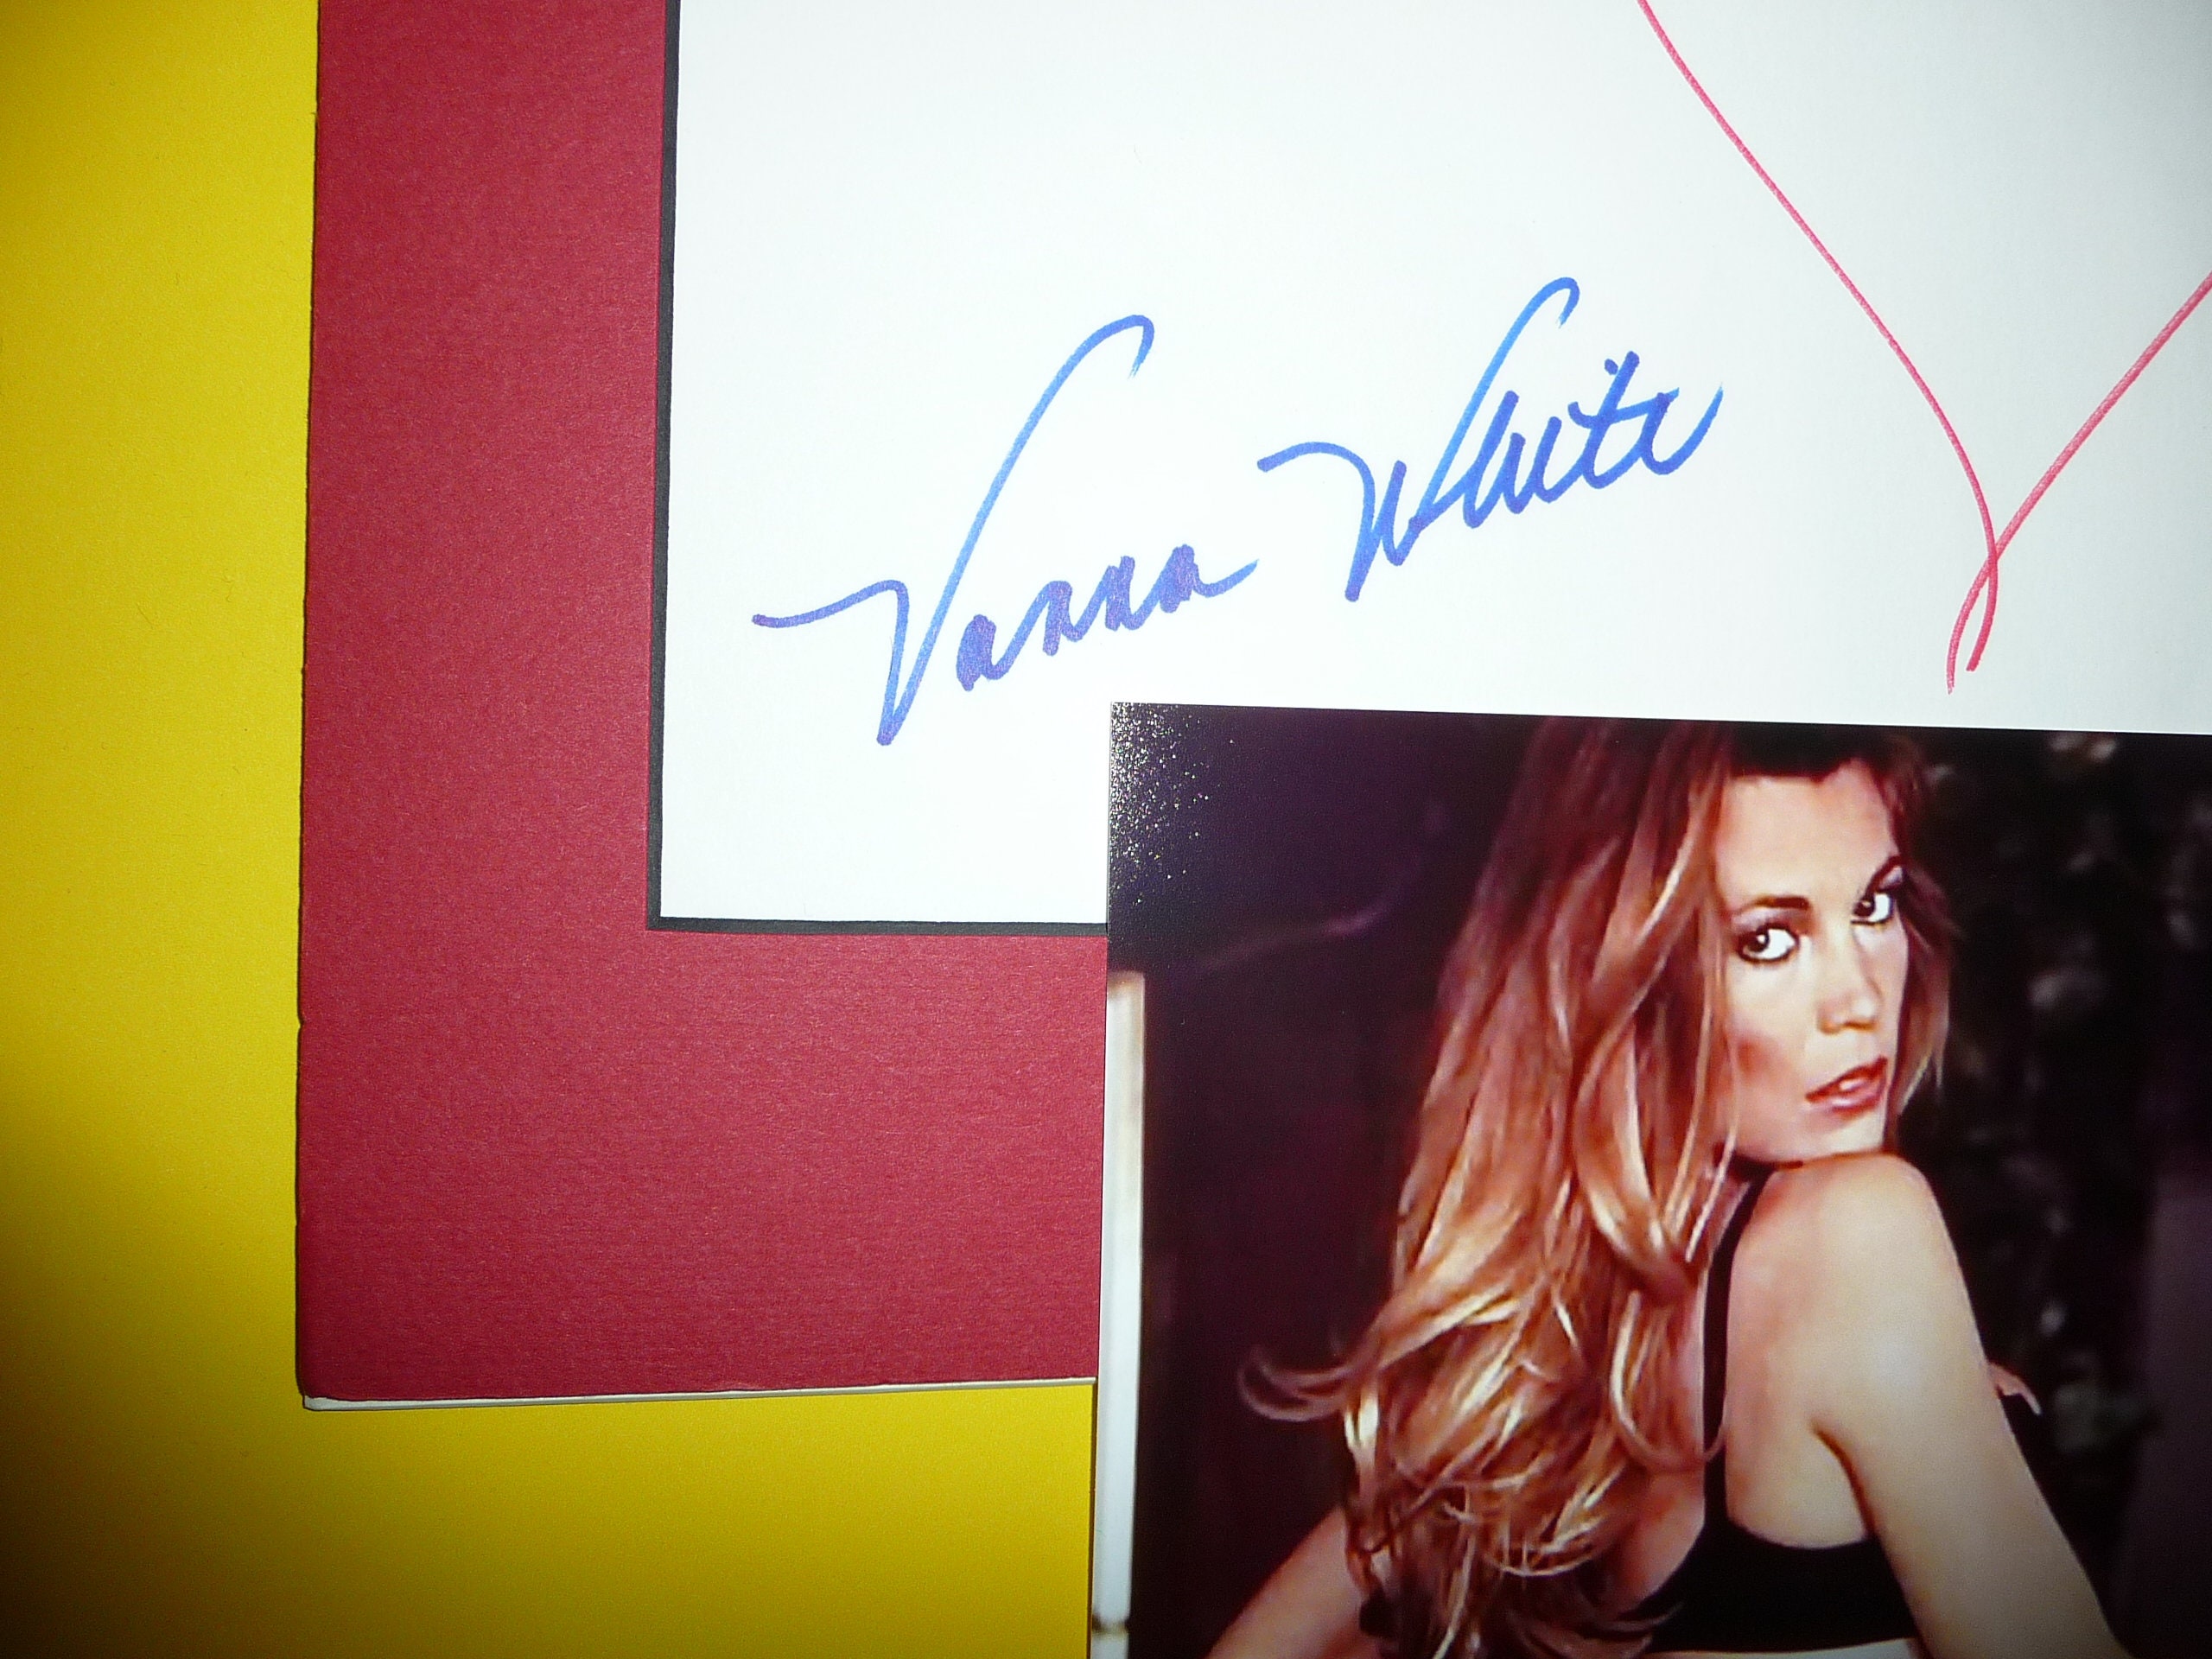 VANNA WHITE SEXY Genuine Signed Doodle W/autograph & 8x10 - Etsy